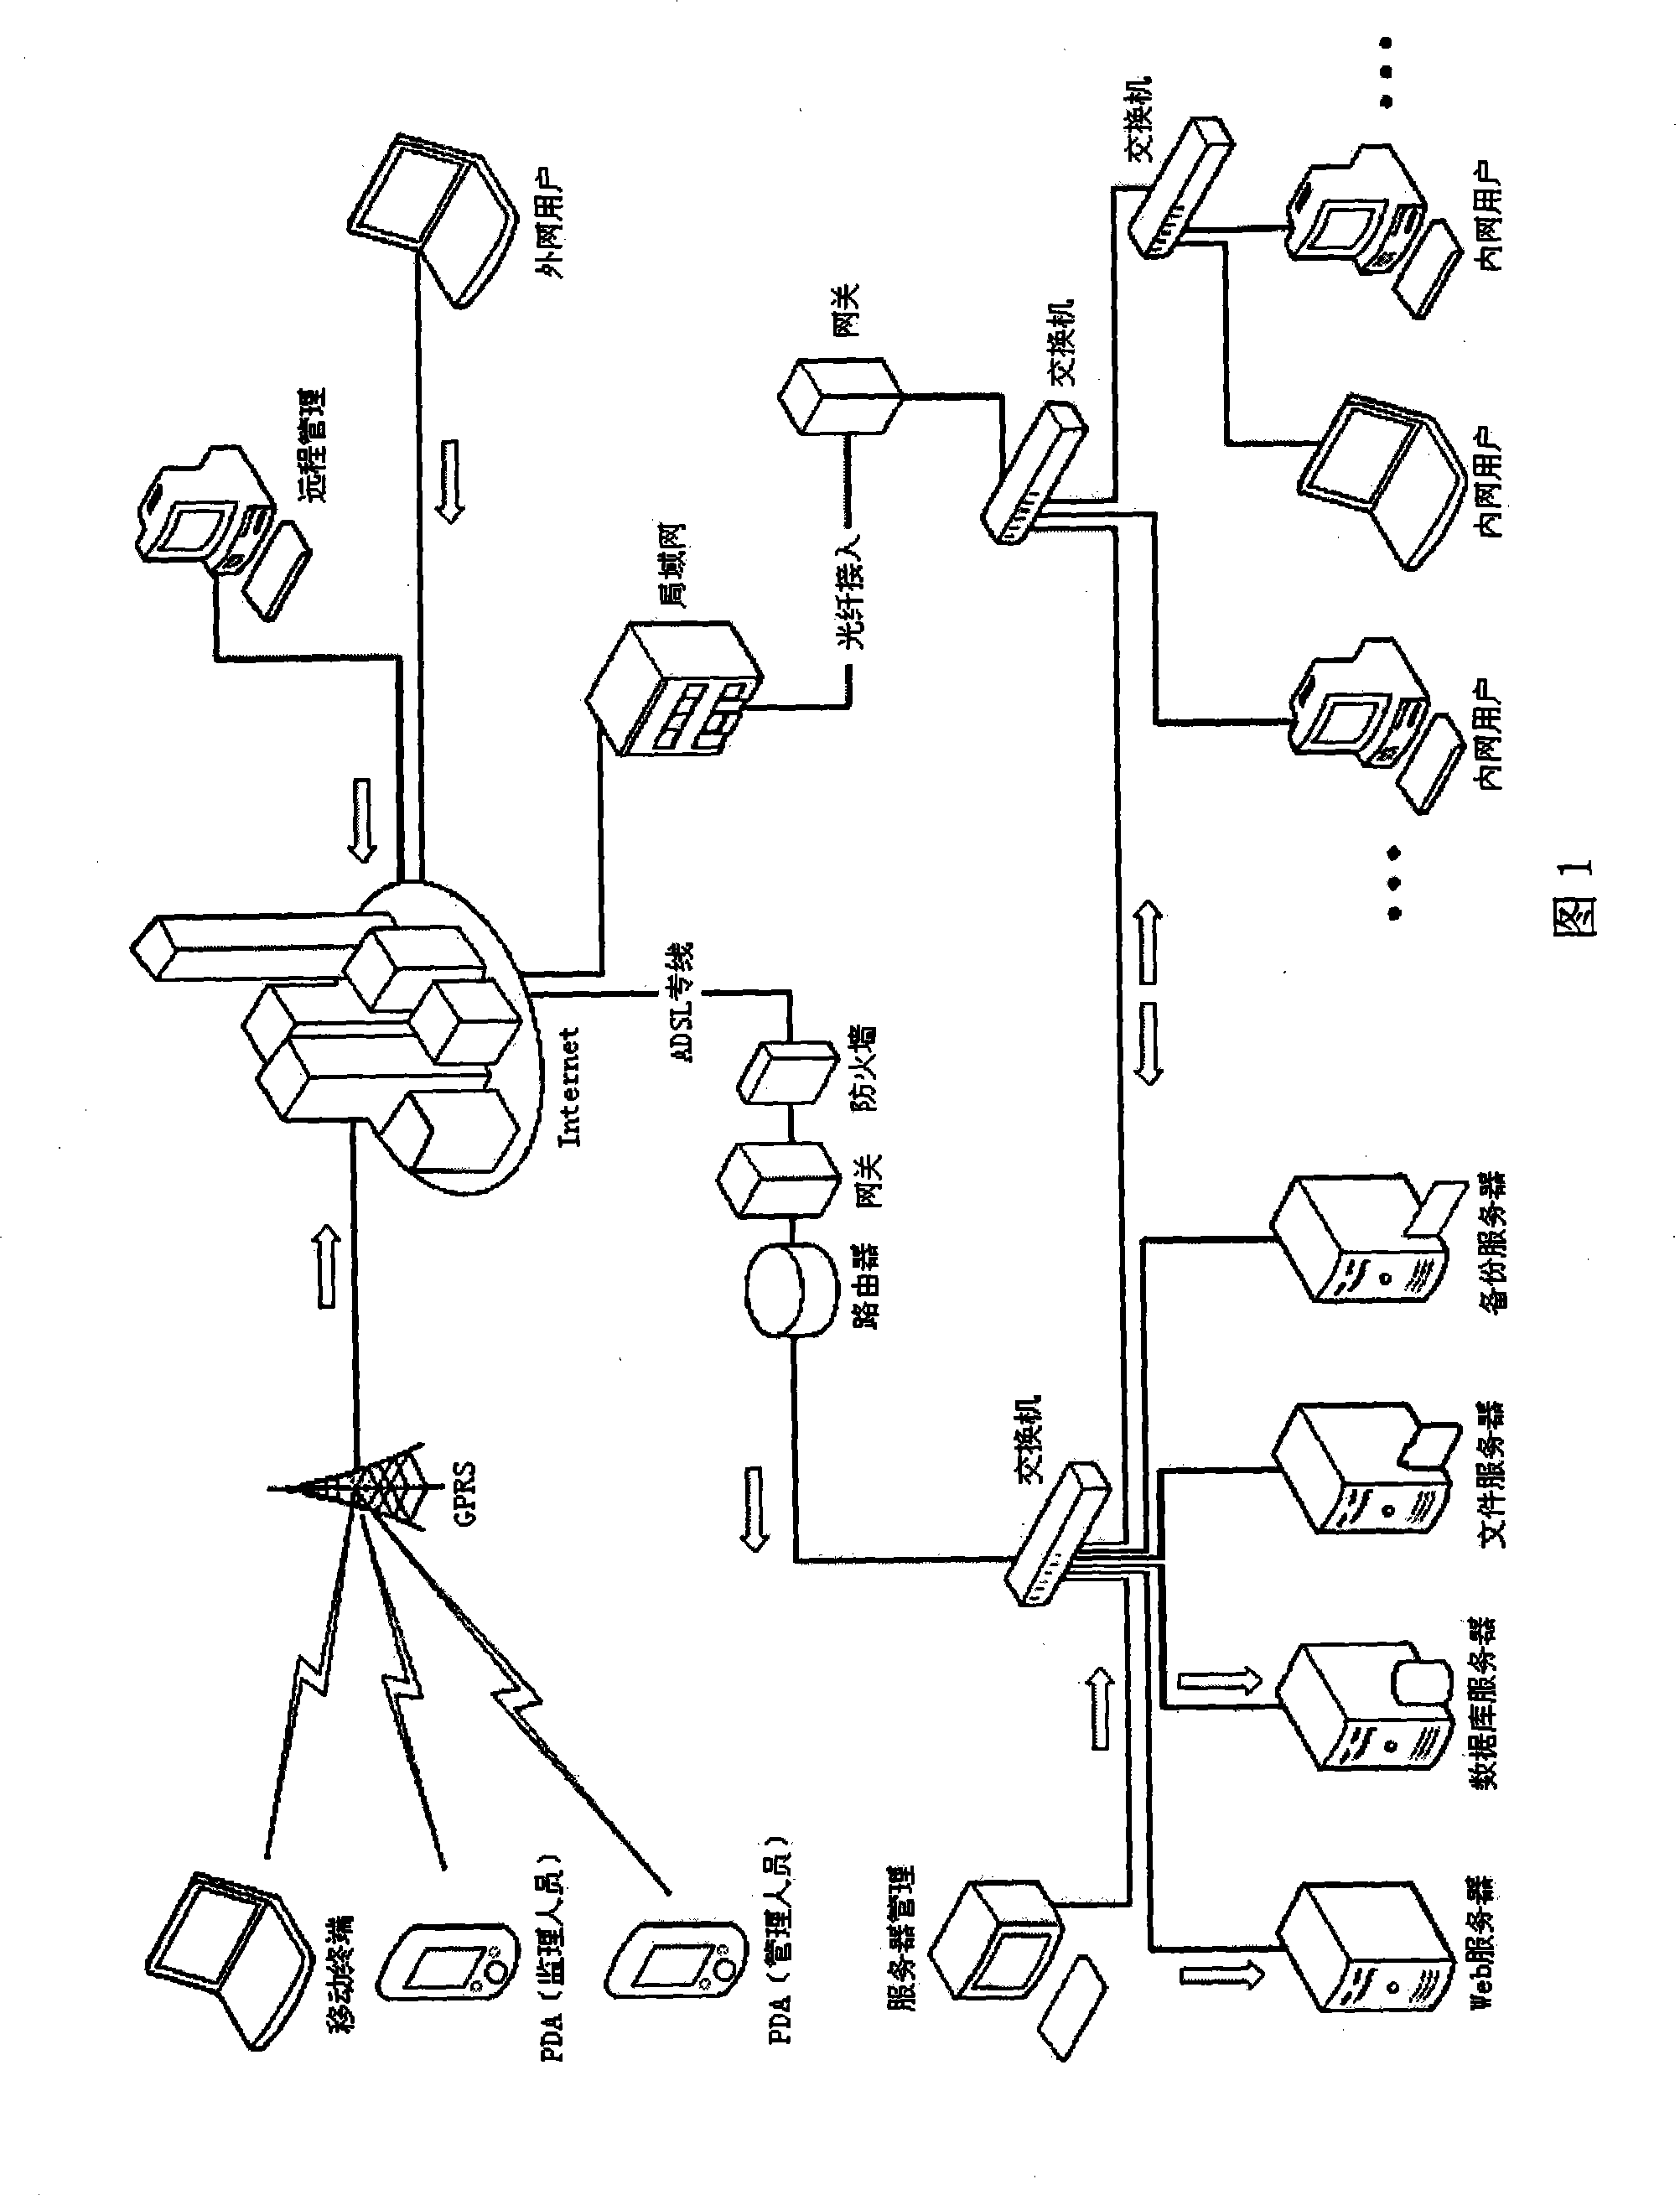 System and method for supervising gas engineering project